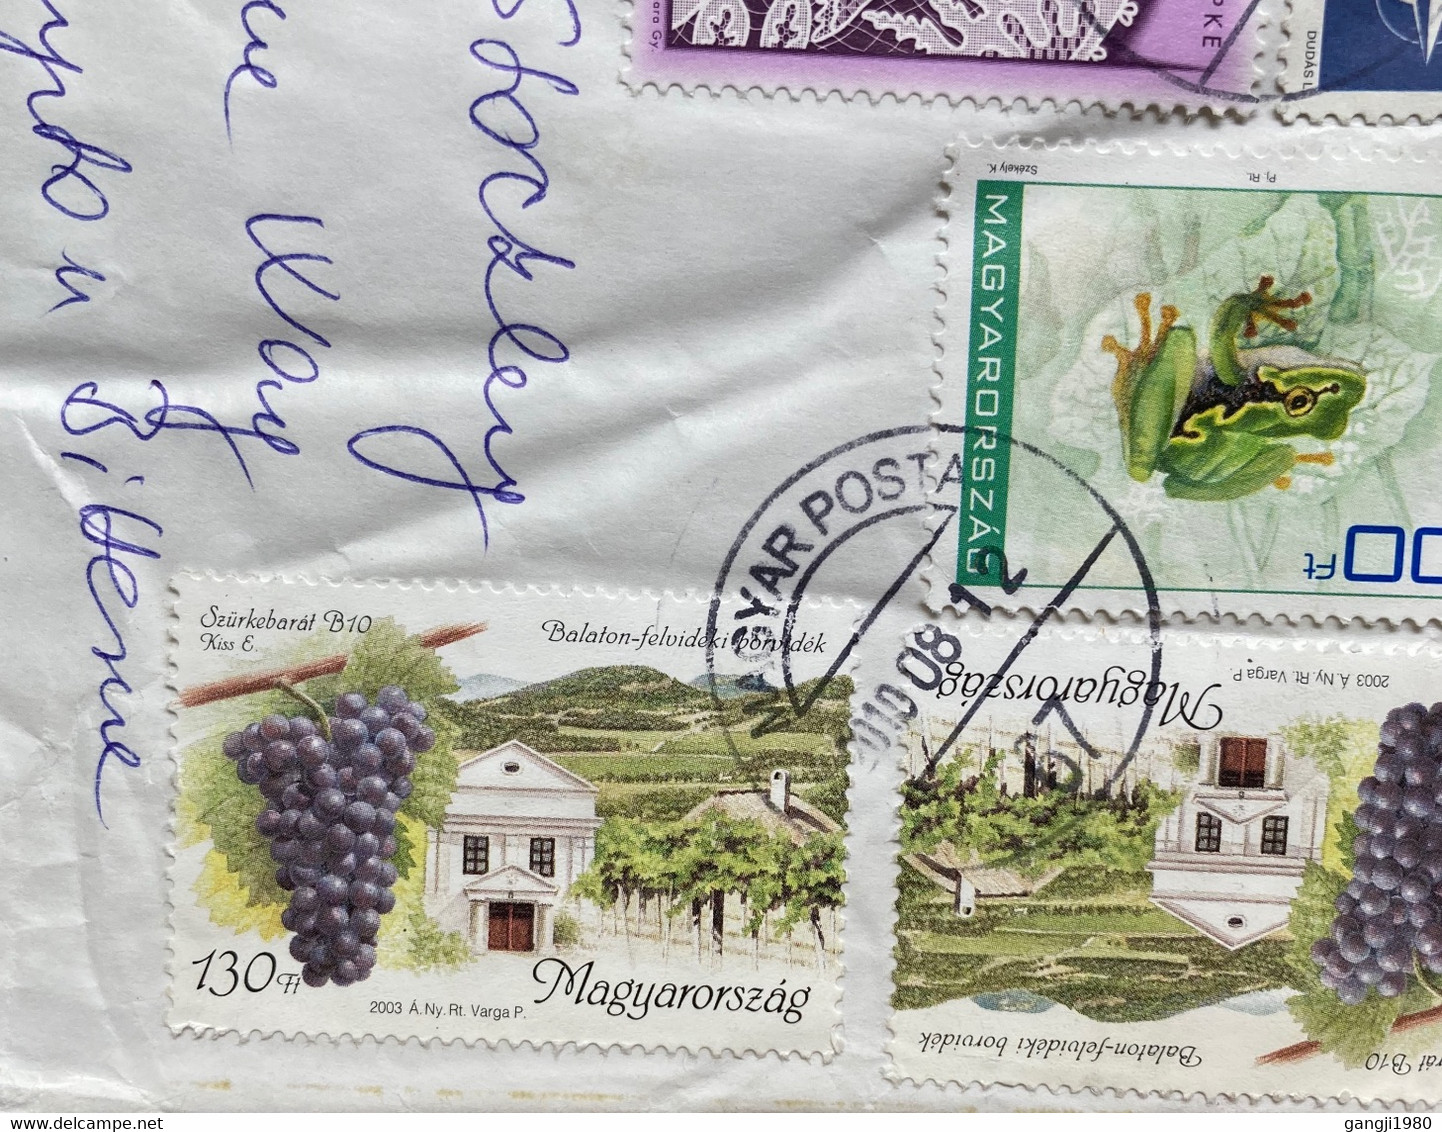 HUNGARY 2001-2002, COUPLE DANCE,FROG ,FISH ,RAILWAY,GRAPE ,EUROPA, MAP, NATURE,BUILDING,11 REGISTERED STAMPS USED !!! CO - Briefe U. Dokumente